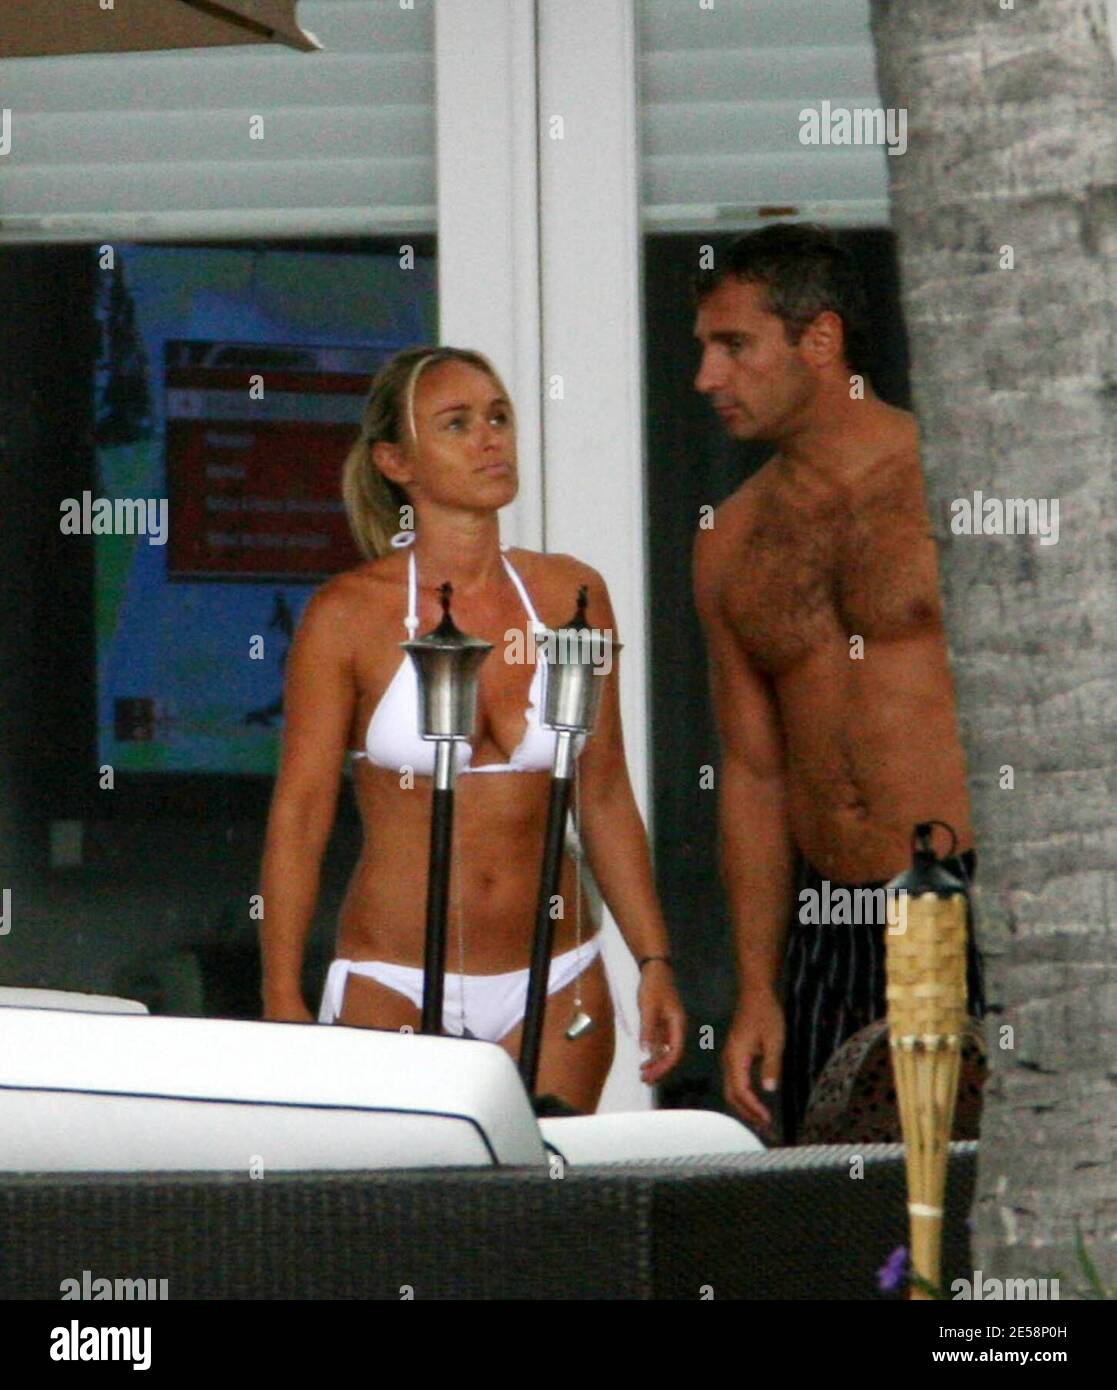 Exclusive!! Cecile de Menibus and Yann Delaigue spend time poolside with  friends at a luxury mansion in Miami Beach, FL. Cecile looked great in a  white bikini and Yan practised his rugby